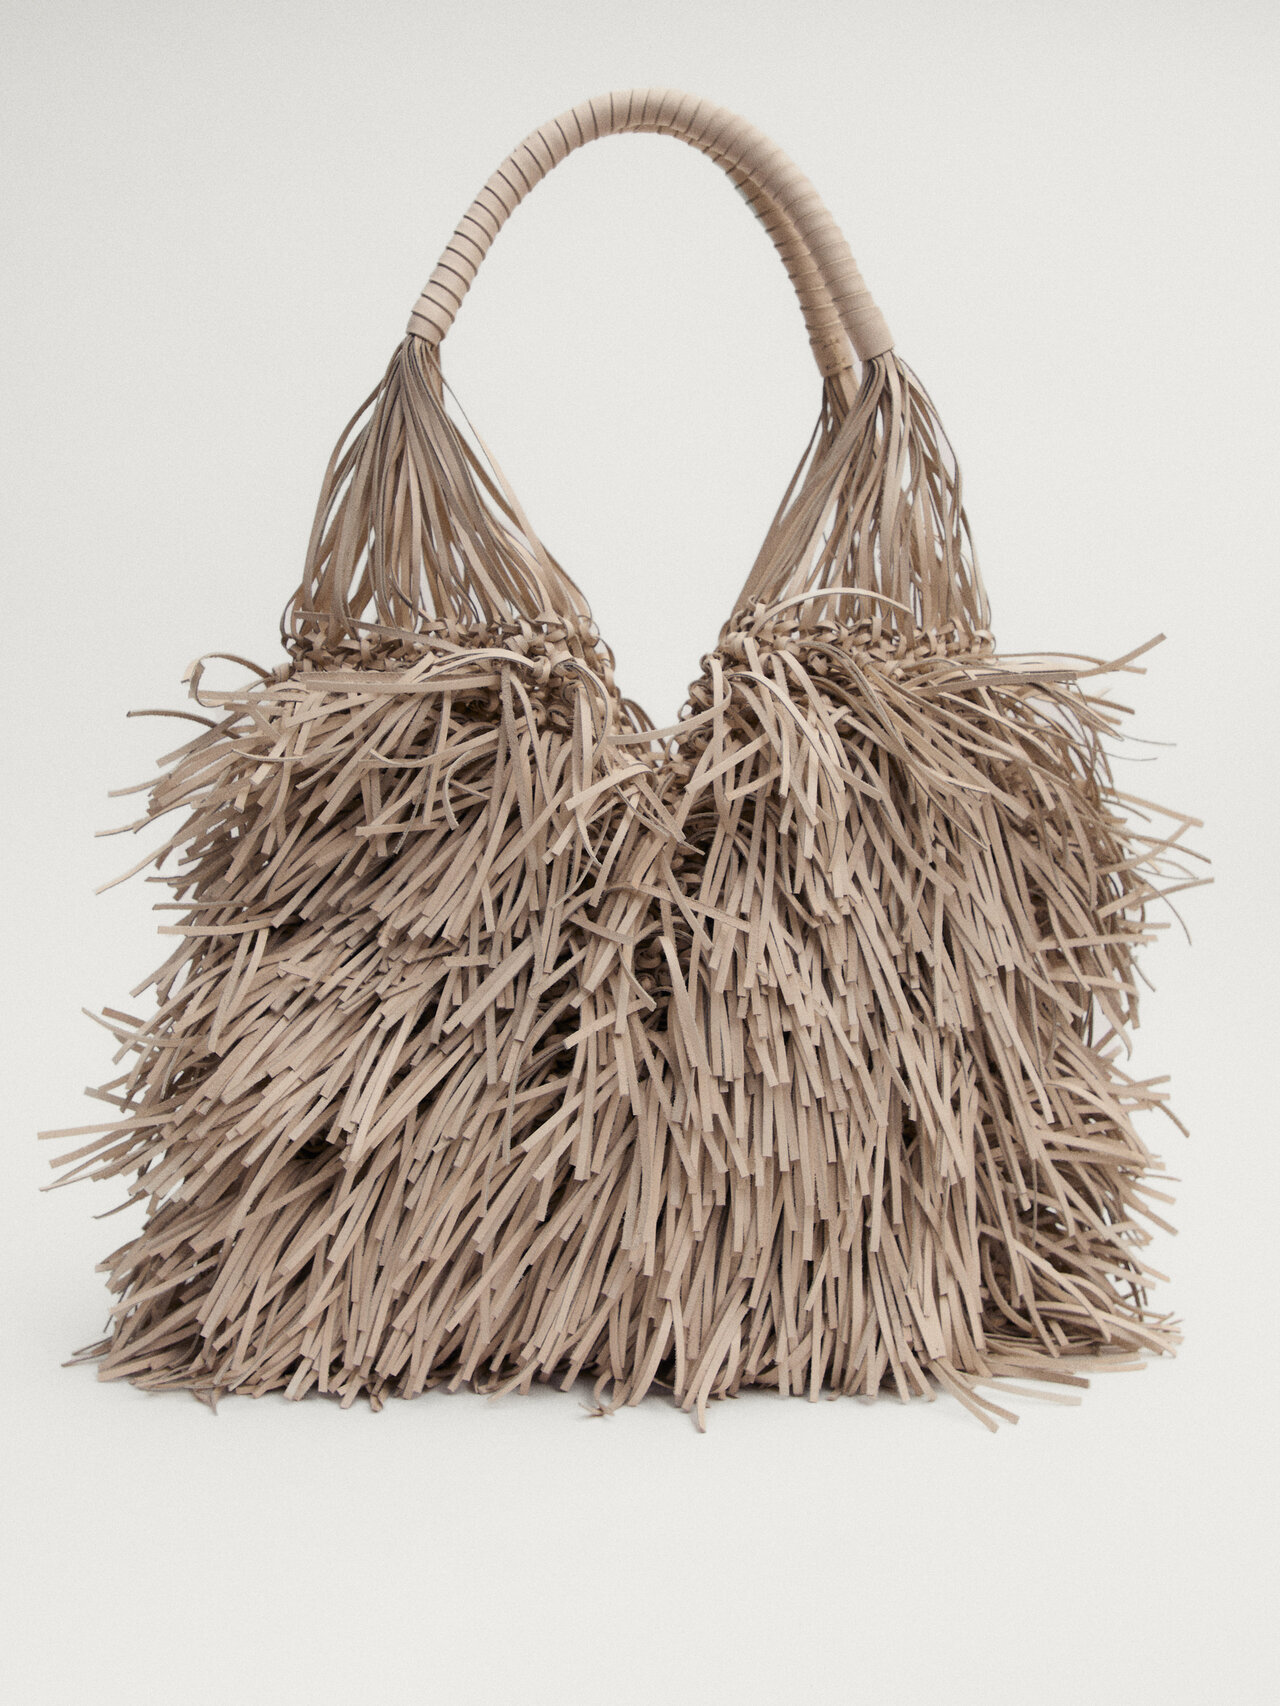 Nappa leather bag with fringe detail